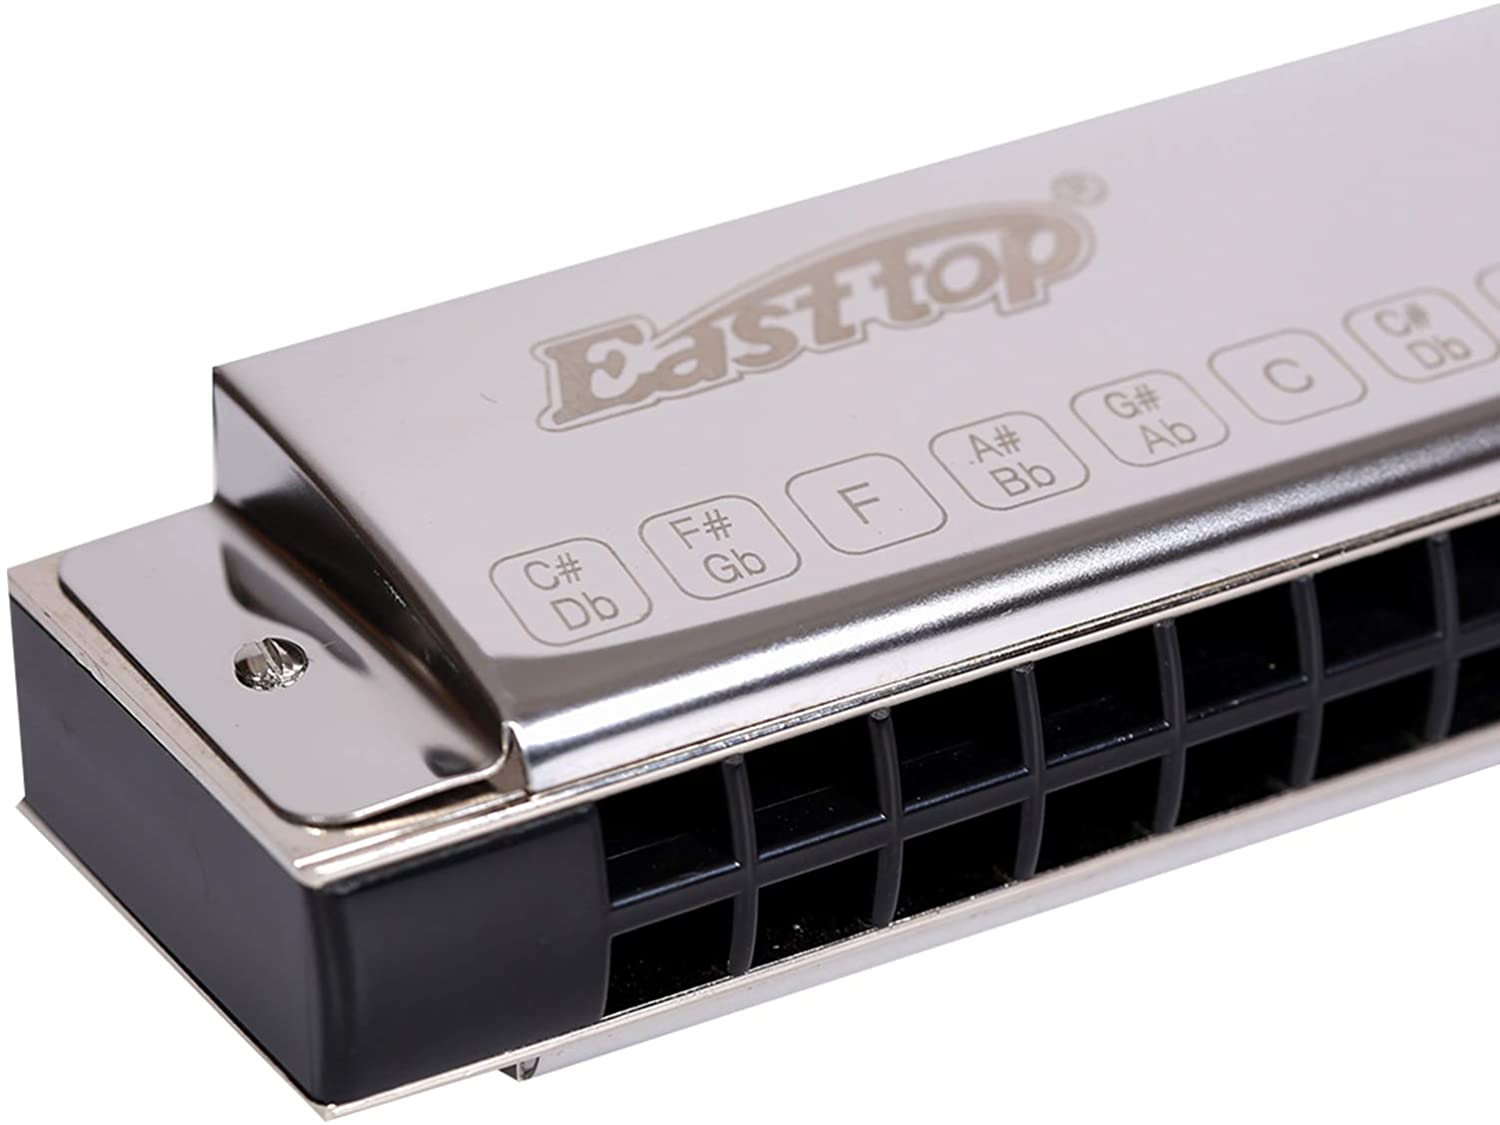 East top Mediant Harmonica, Orchestral Harmonica Harmoncia For Adults, Professional Band Player and Students - Easttop harmonica store